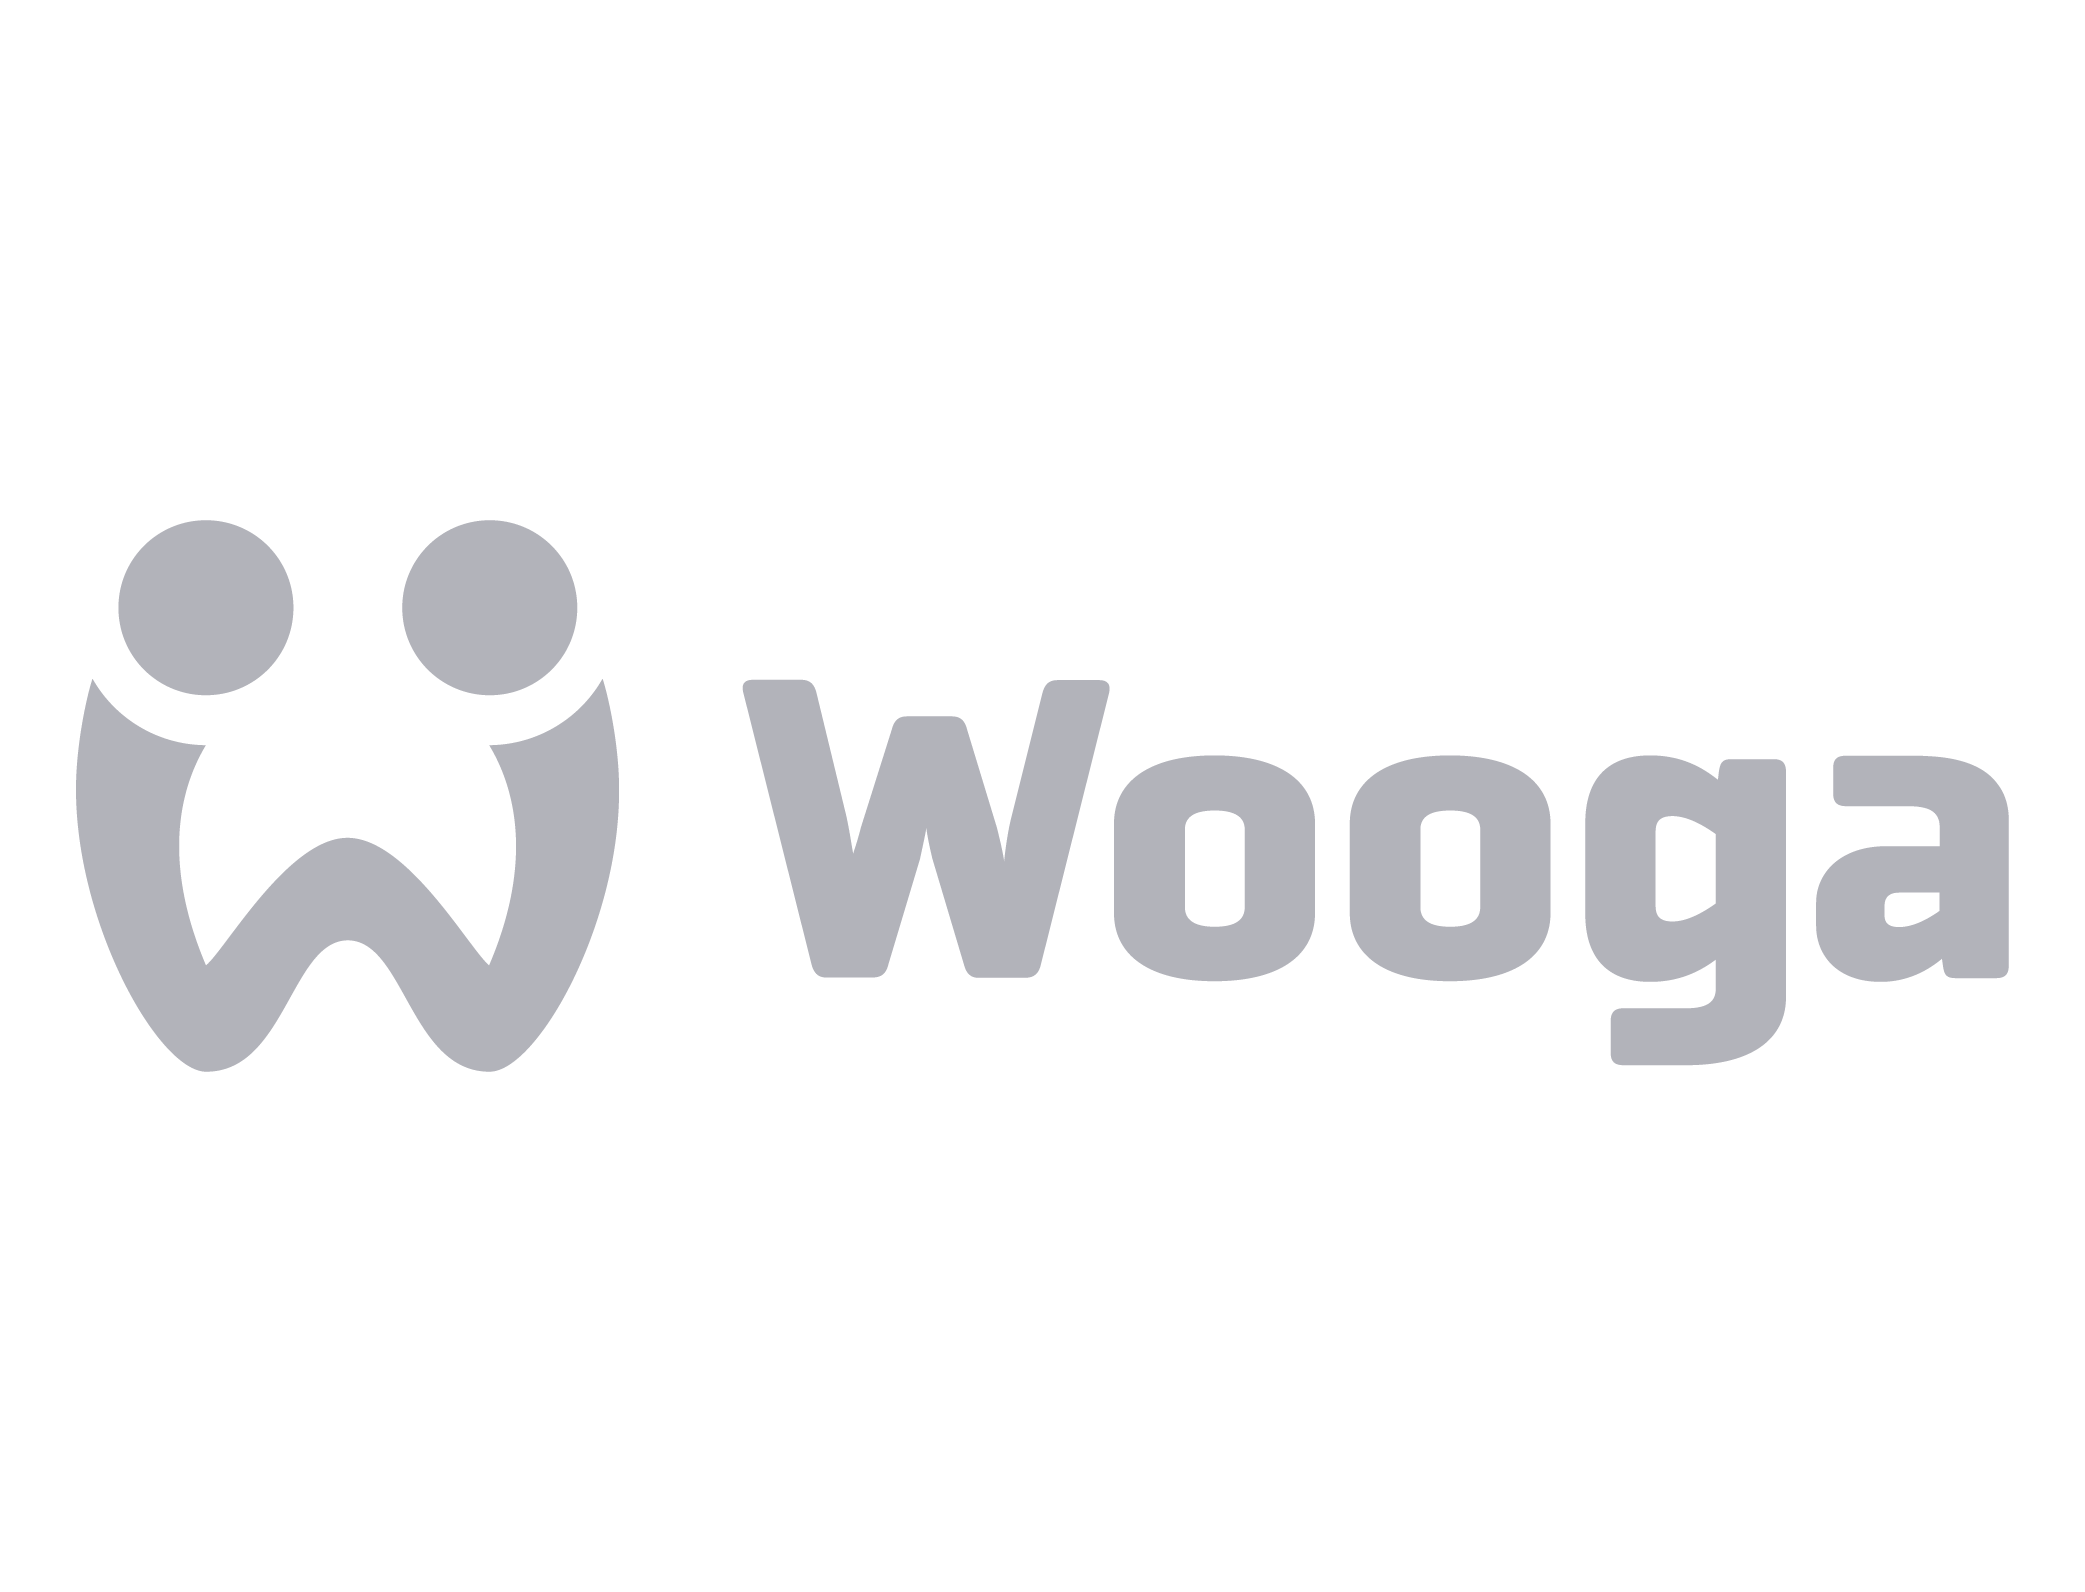 Wooga GameDev logo - trusted partners of 8Bit gaming industry recruitment